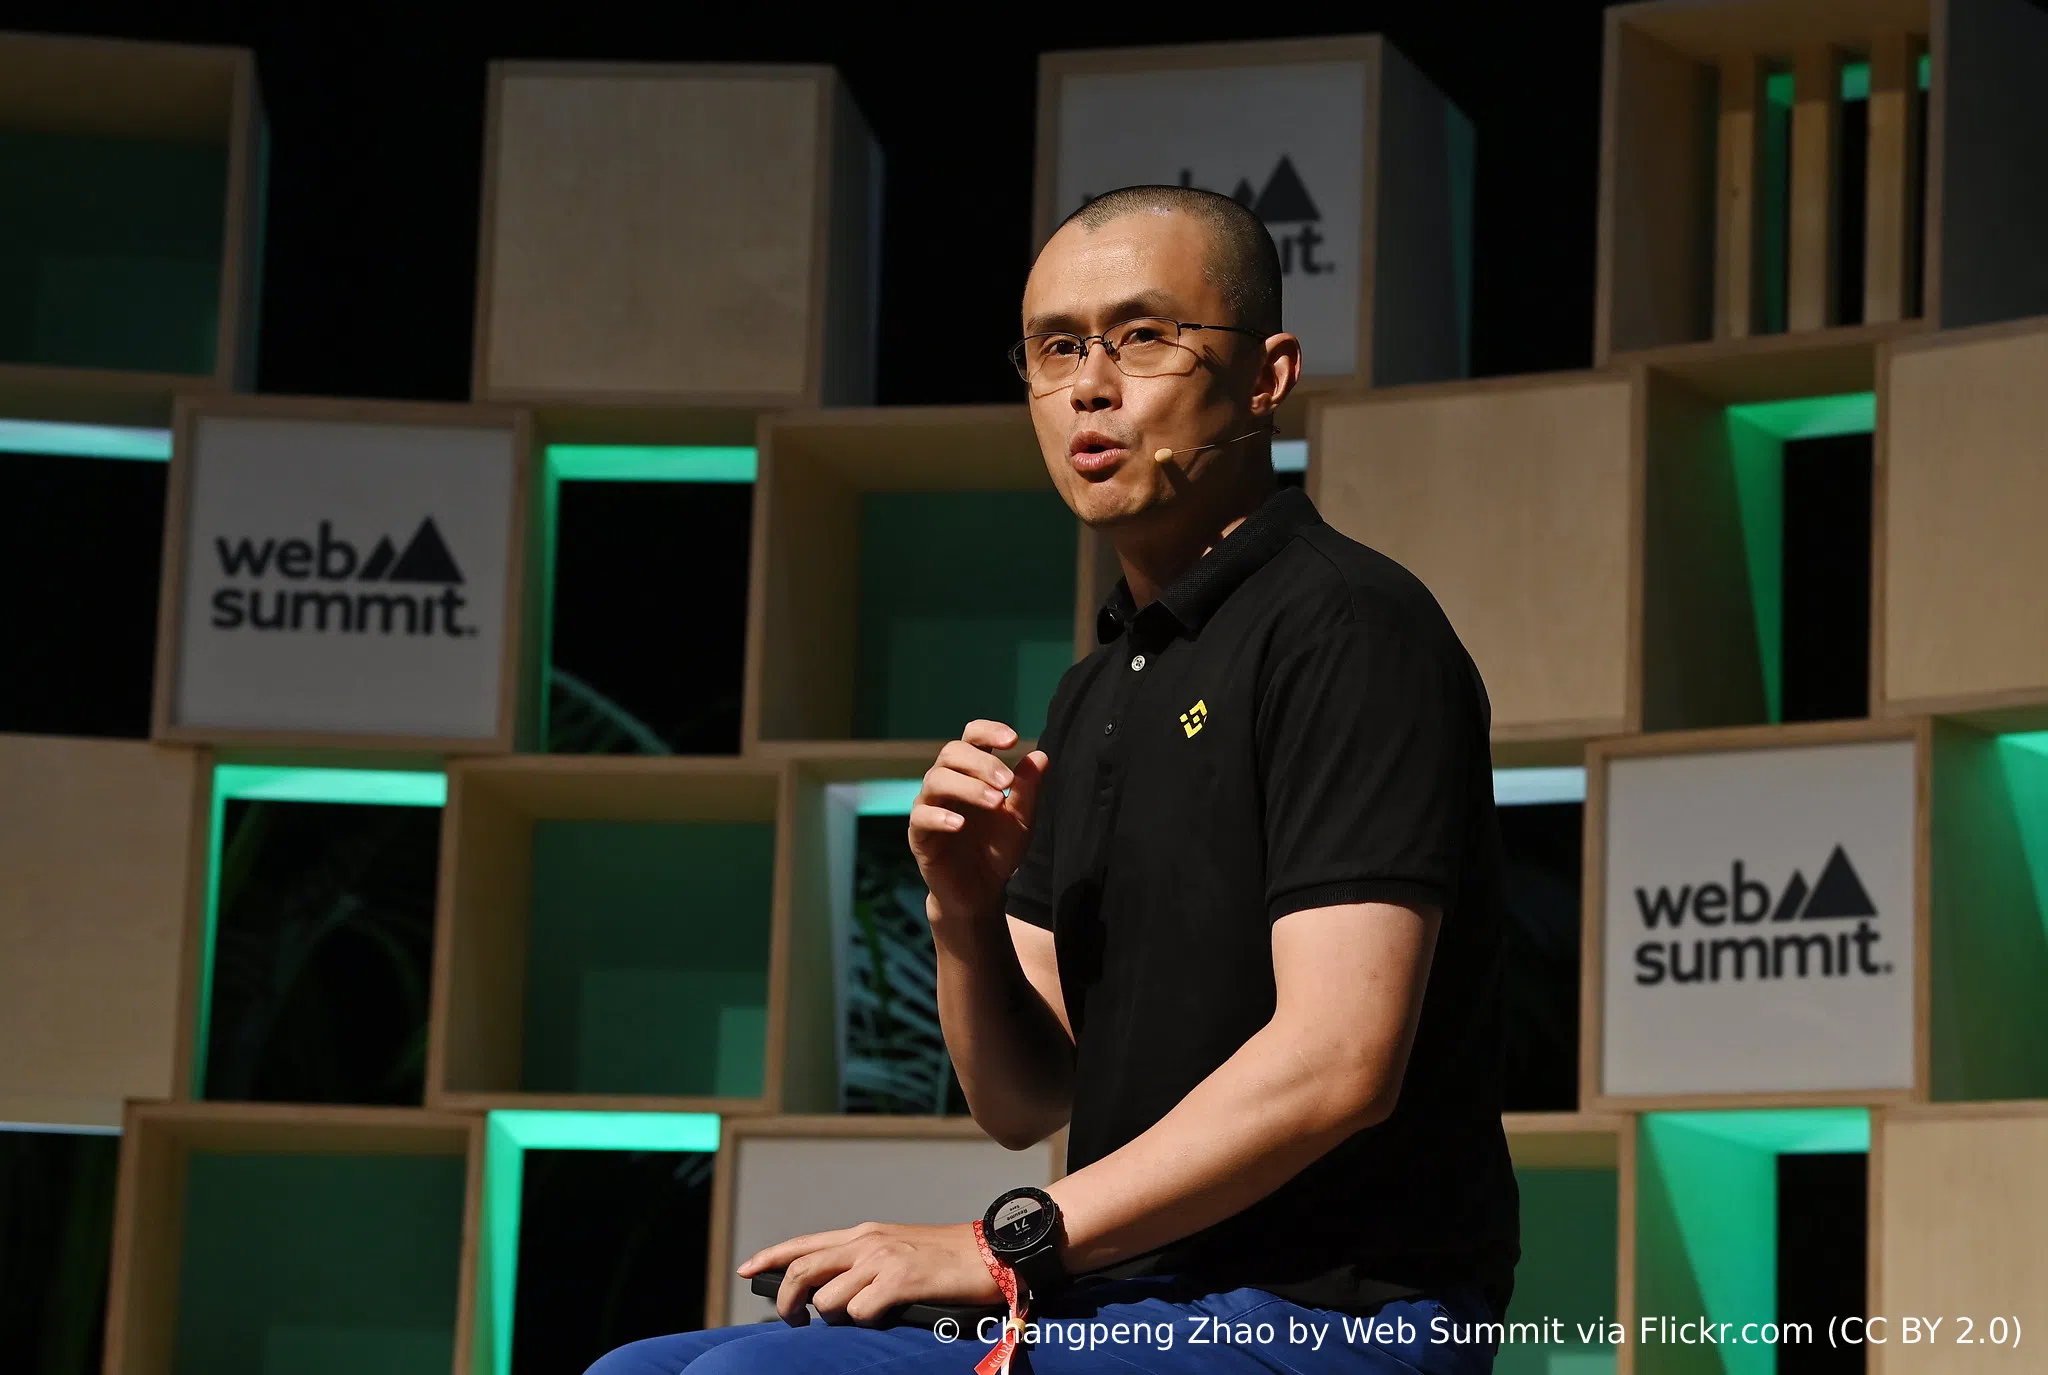 © Changpeng Zhao by Web Summit via Flickr.com (CC BY 2.0)